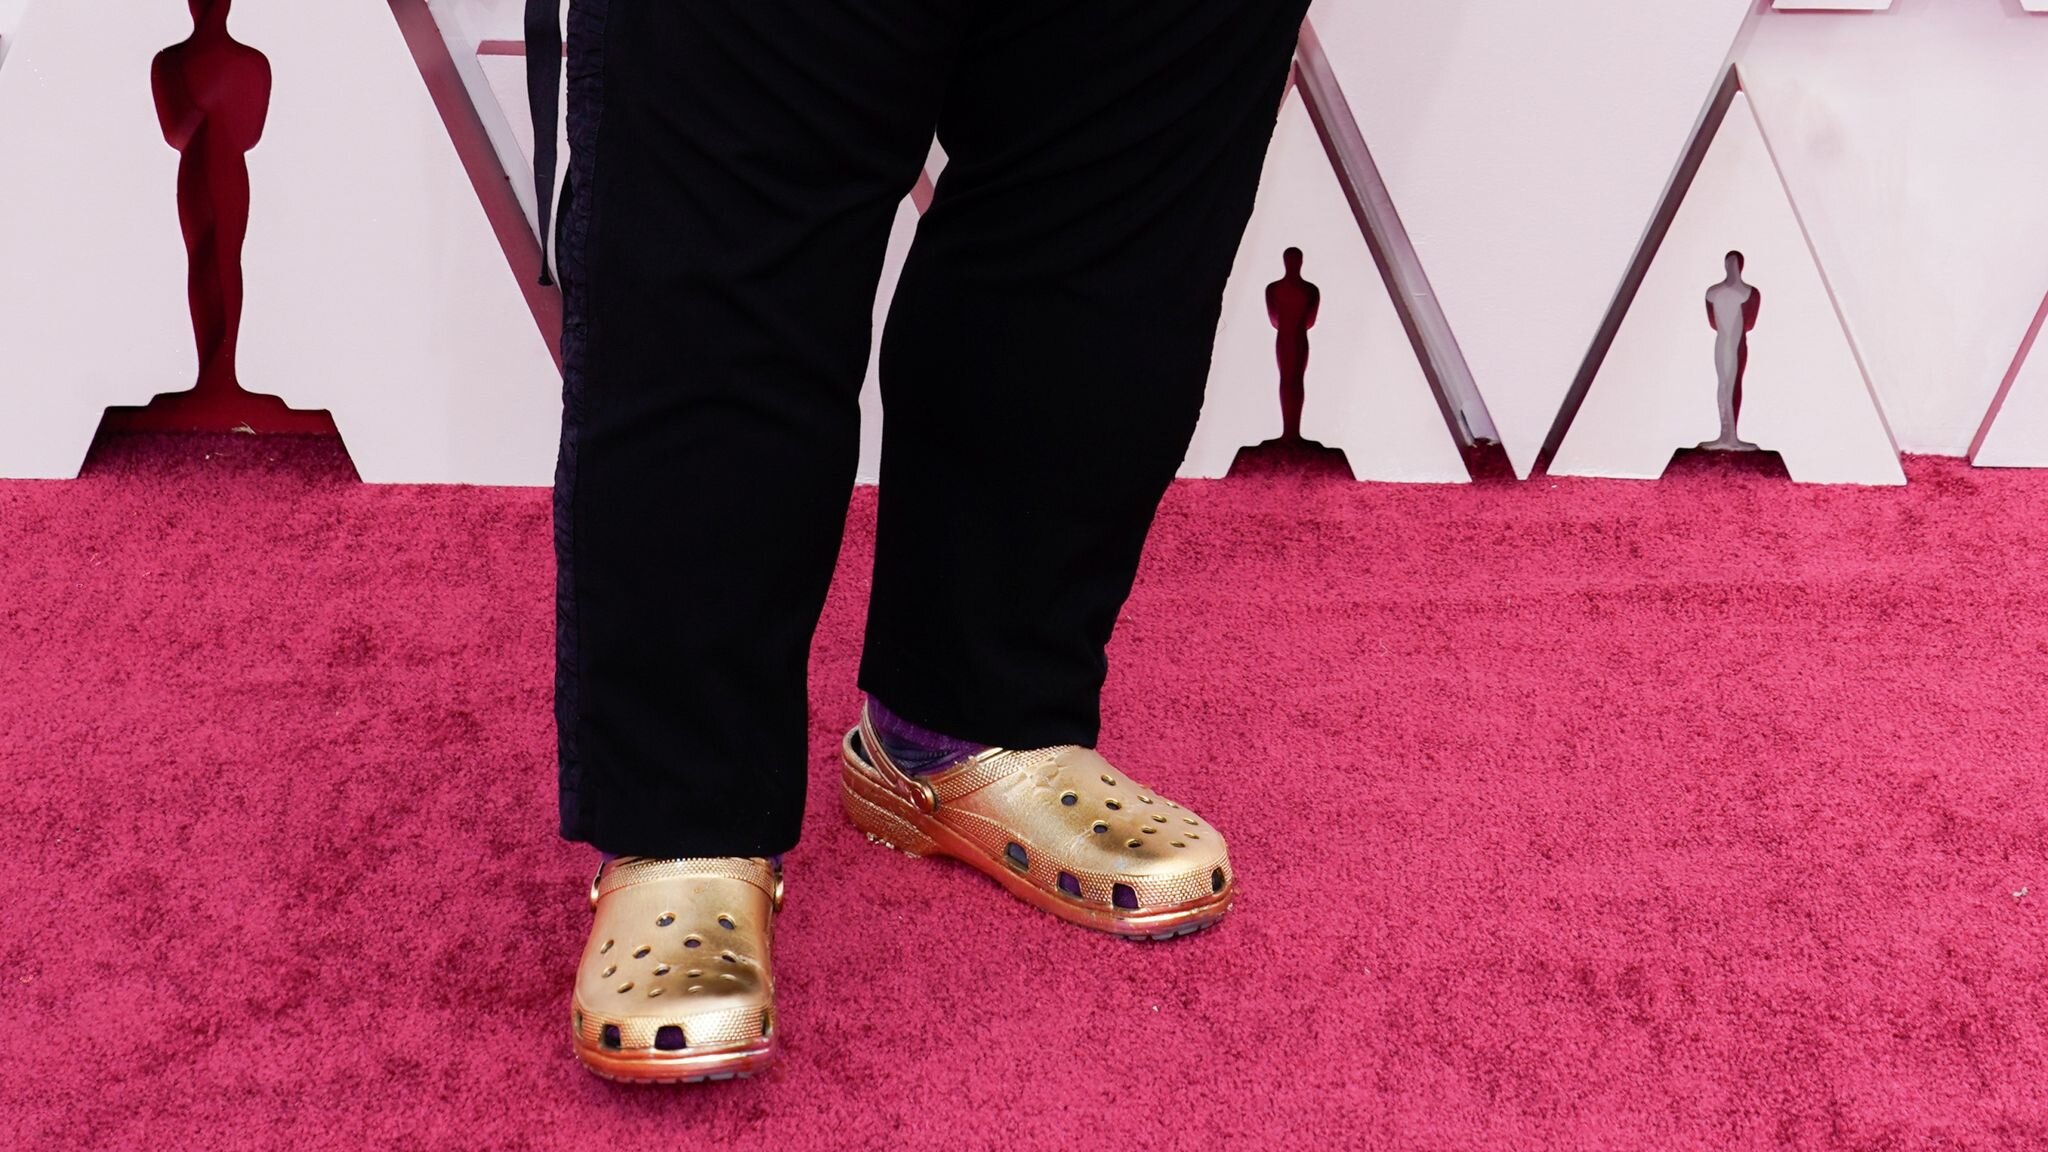 Crocs' Marketing Strategy. How it Turned an “Ugly” Shoe into a Hot Commodity